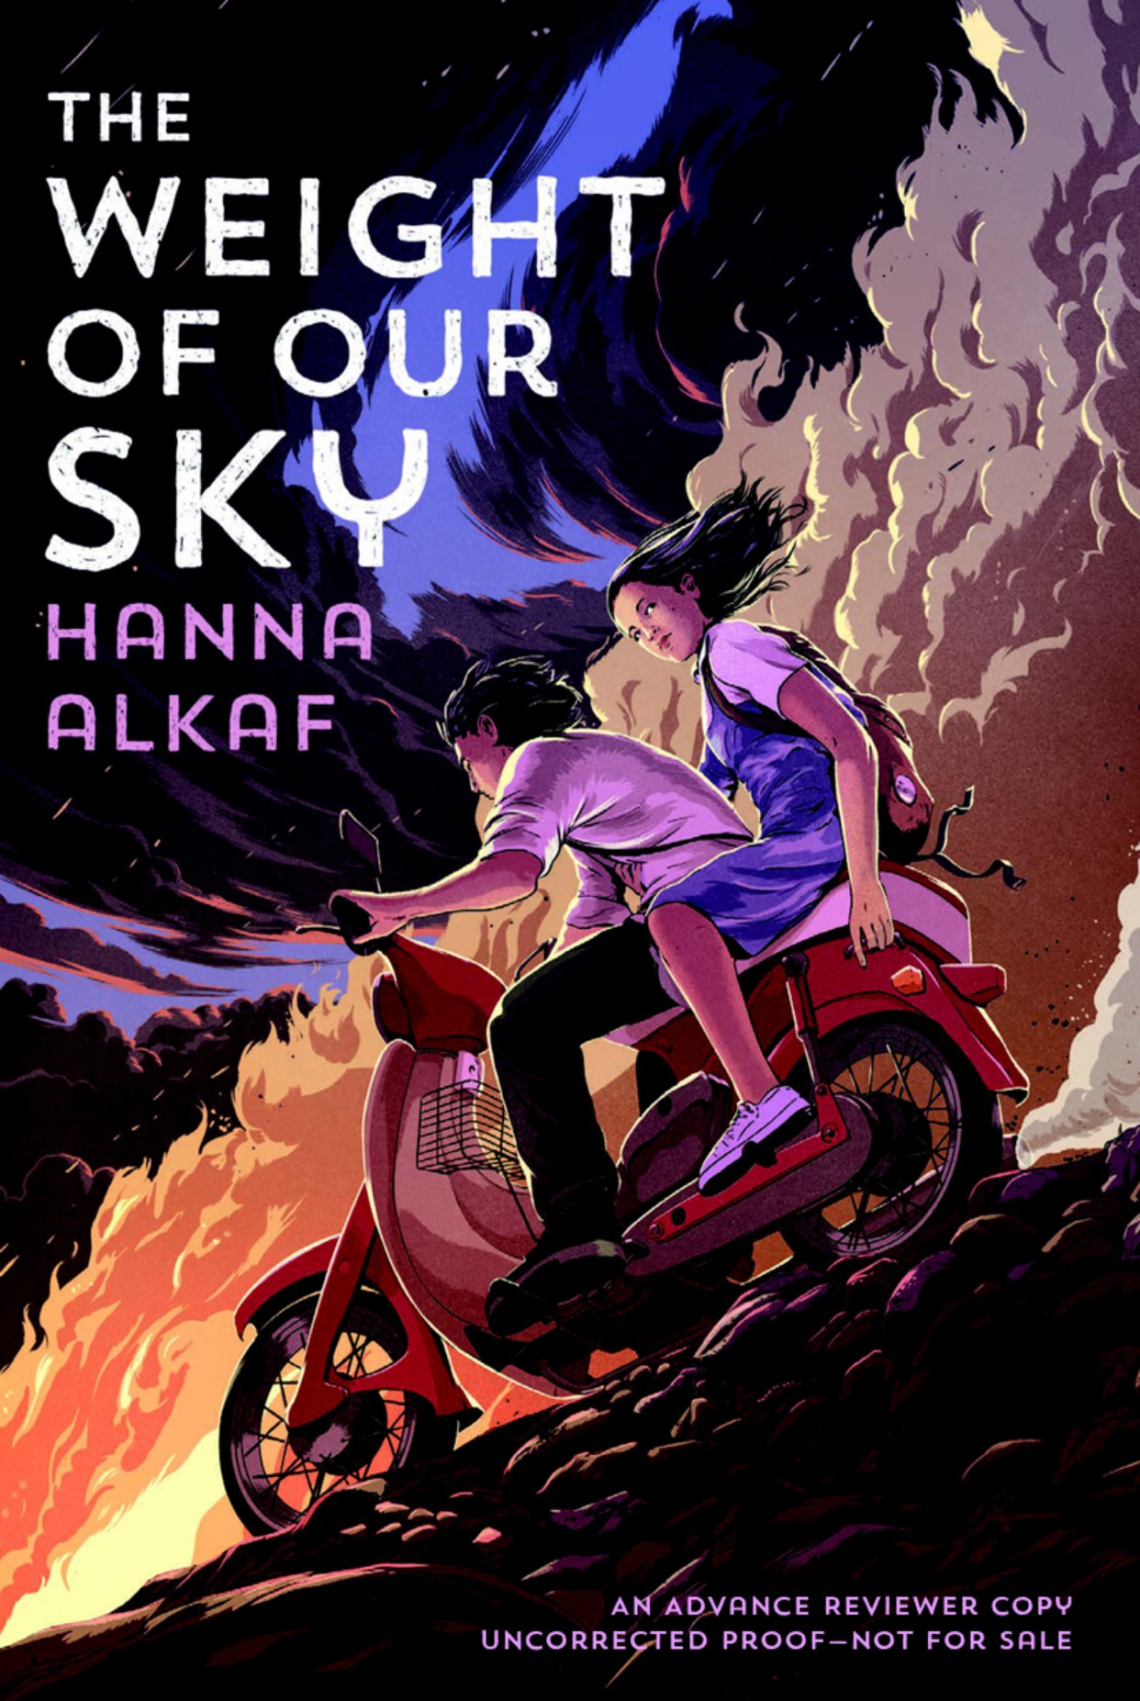 Image for "The Weight of Our Sky"